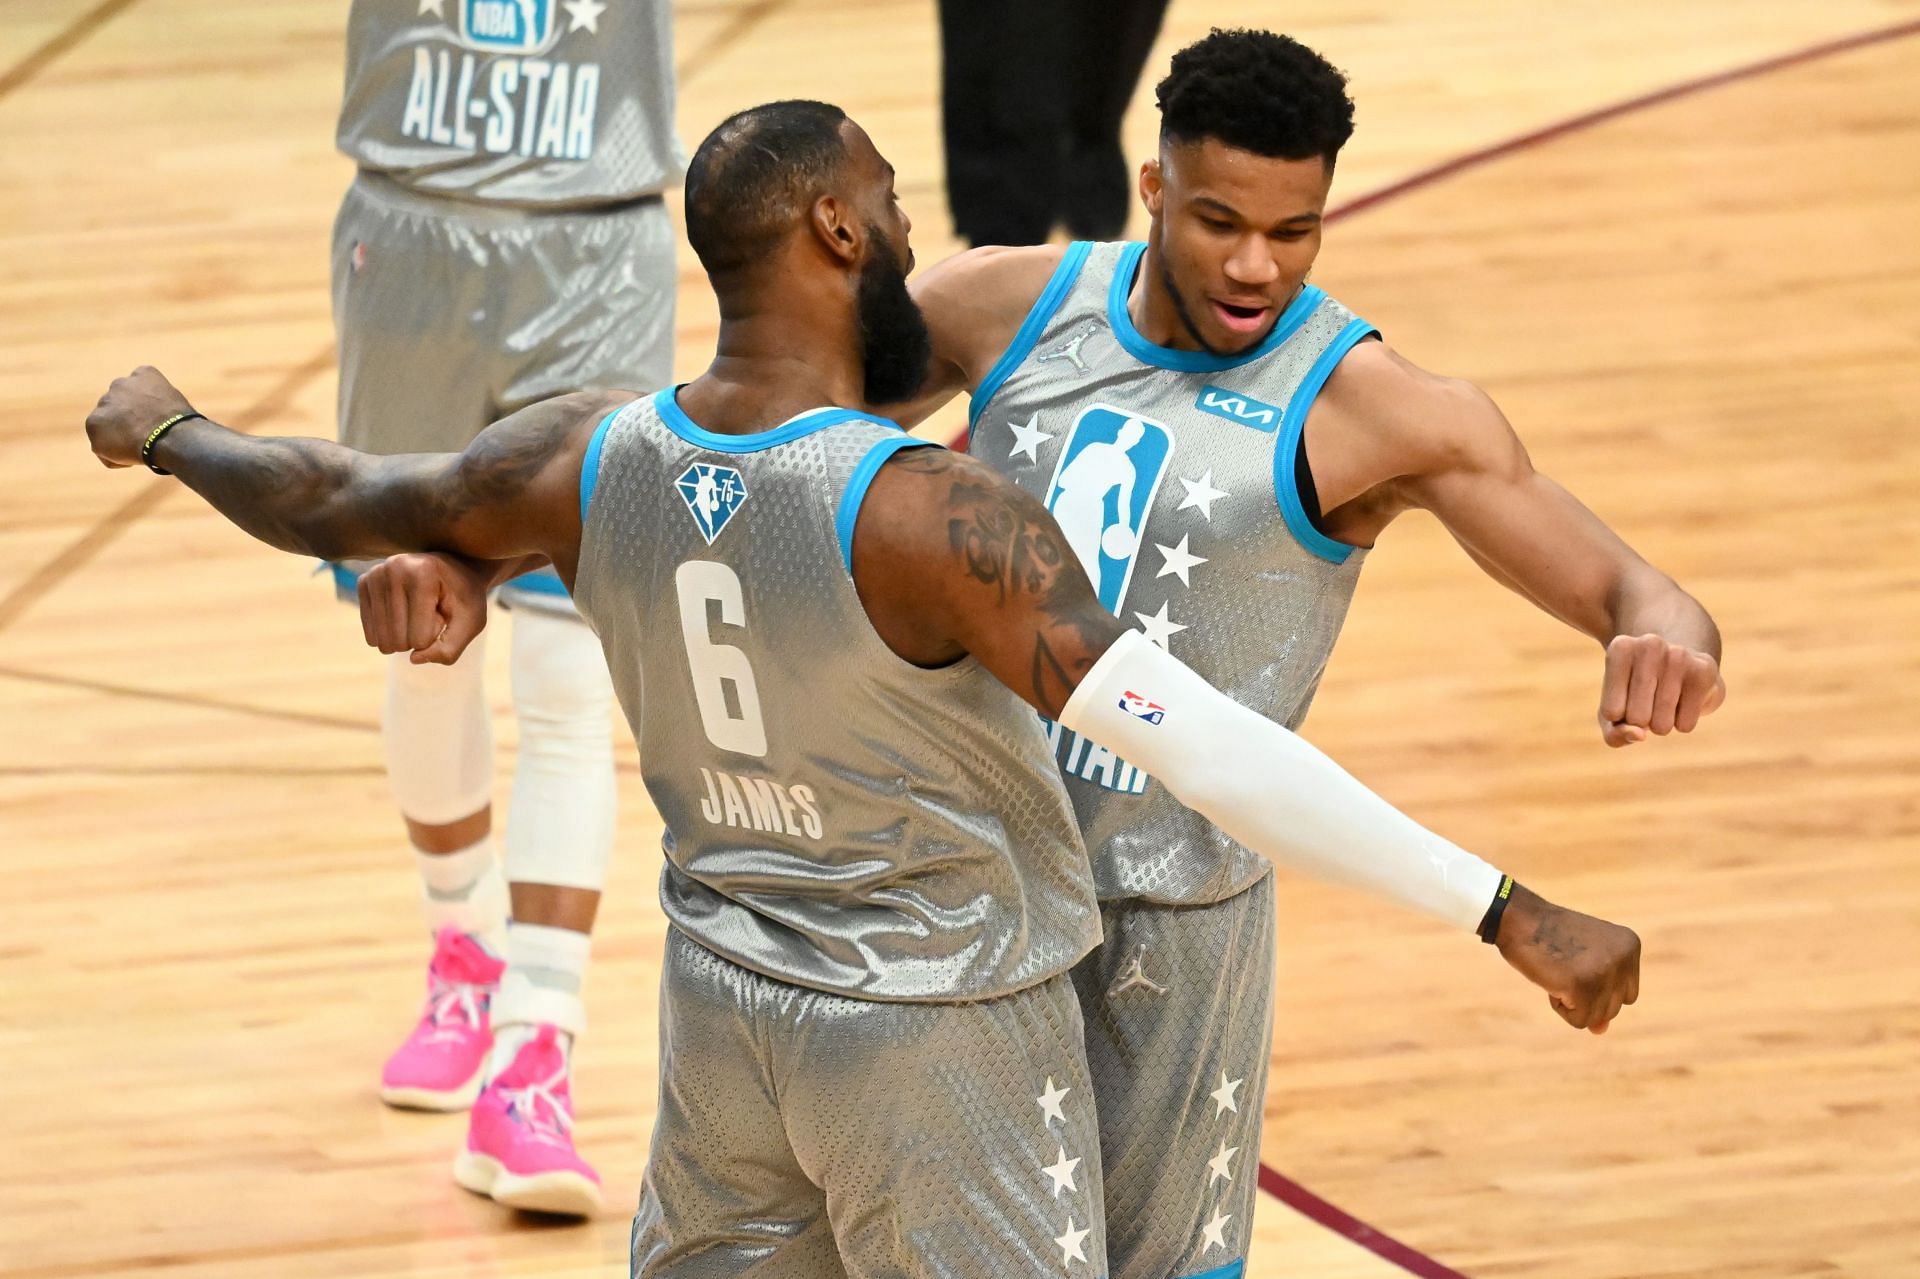 LeBron James #6 and Giannis Antetokounmpo #34 of Team LeBron celebrate after defeating Team Durant 163-160 in during the 2022 NBA All-Star Game at Rocket Mortgage Fieldhouse on February 20, 2022 in Cleveland, Ohio.